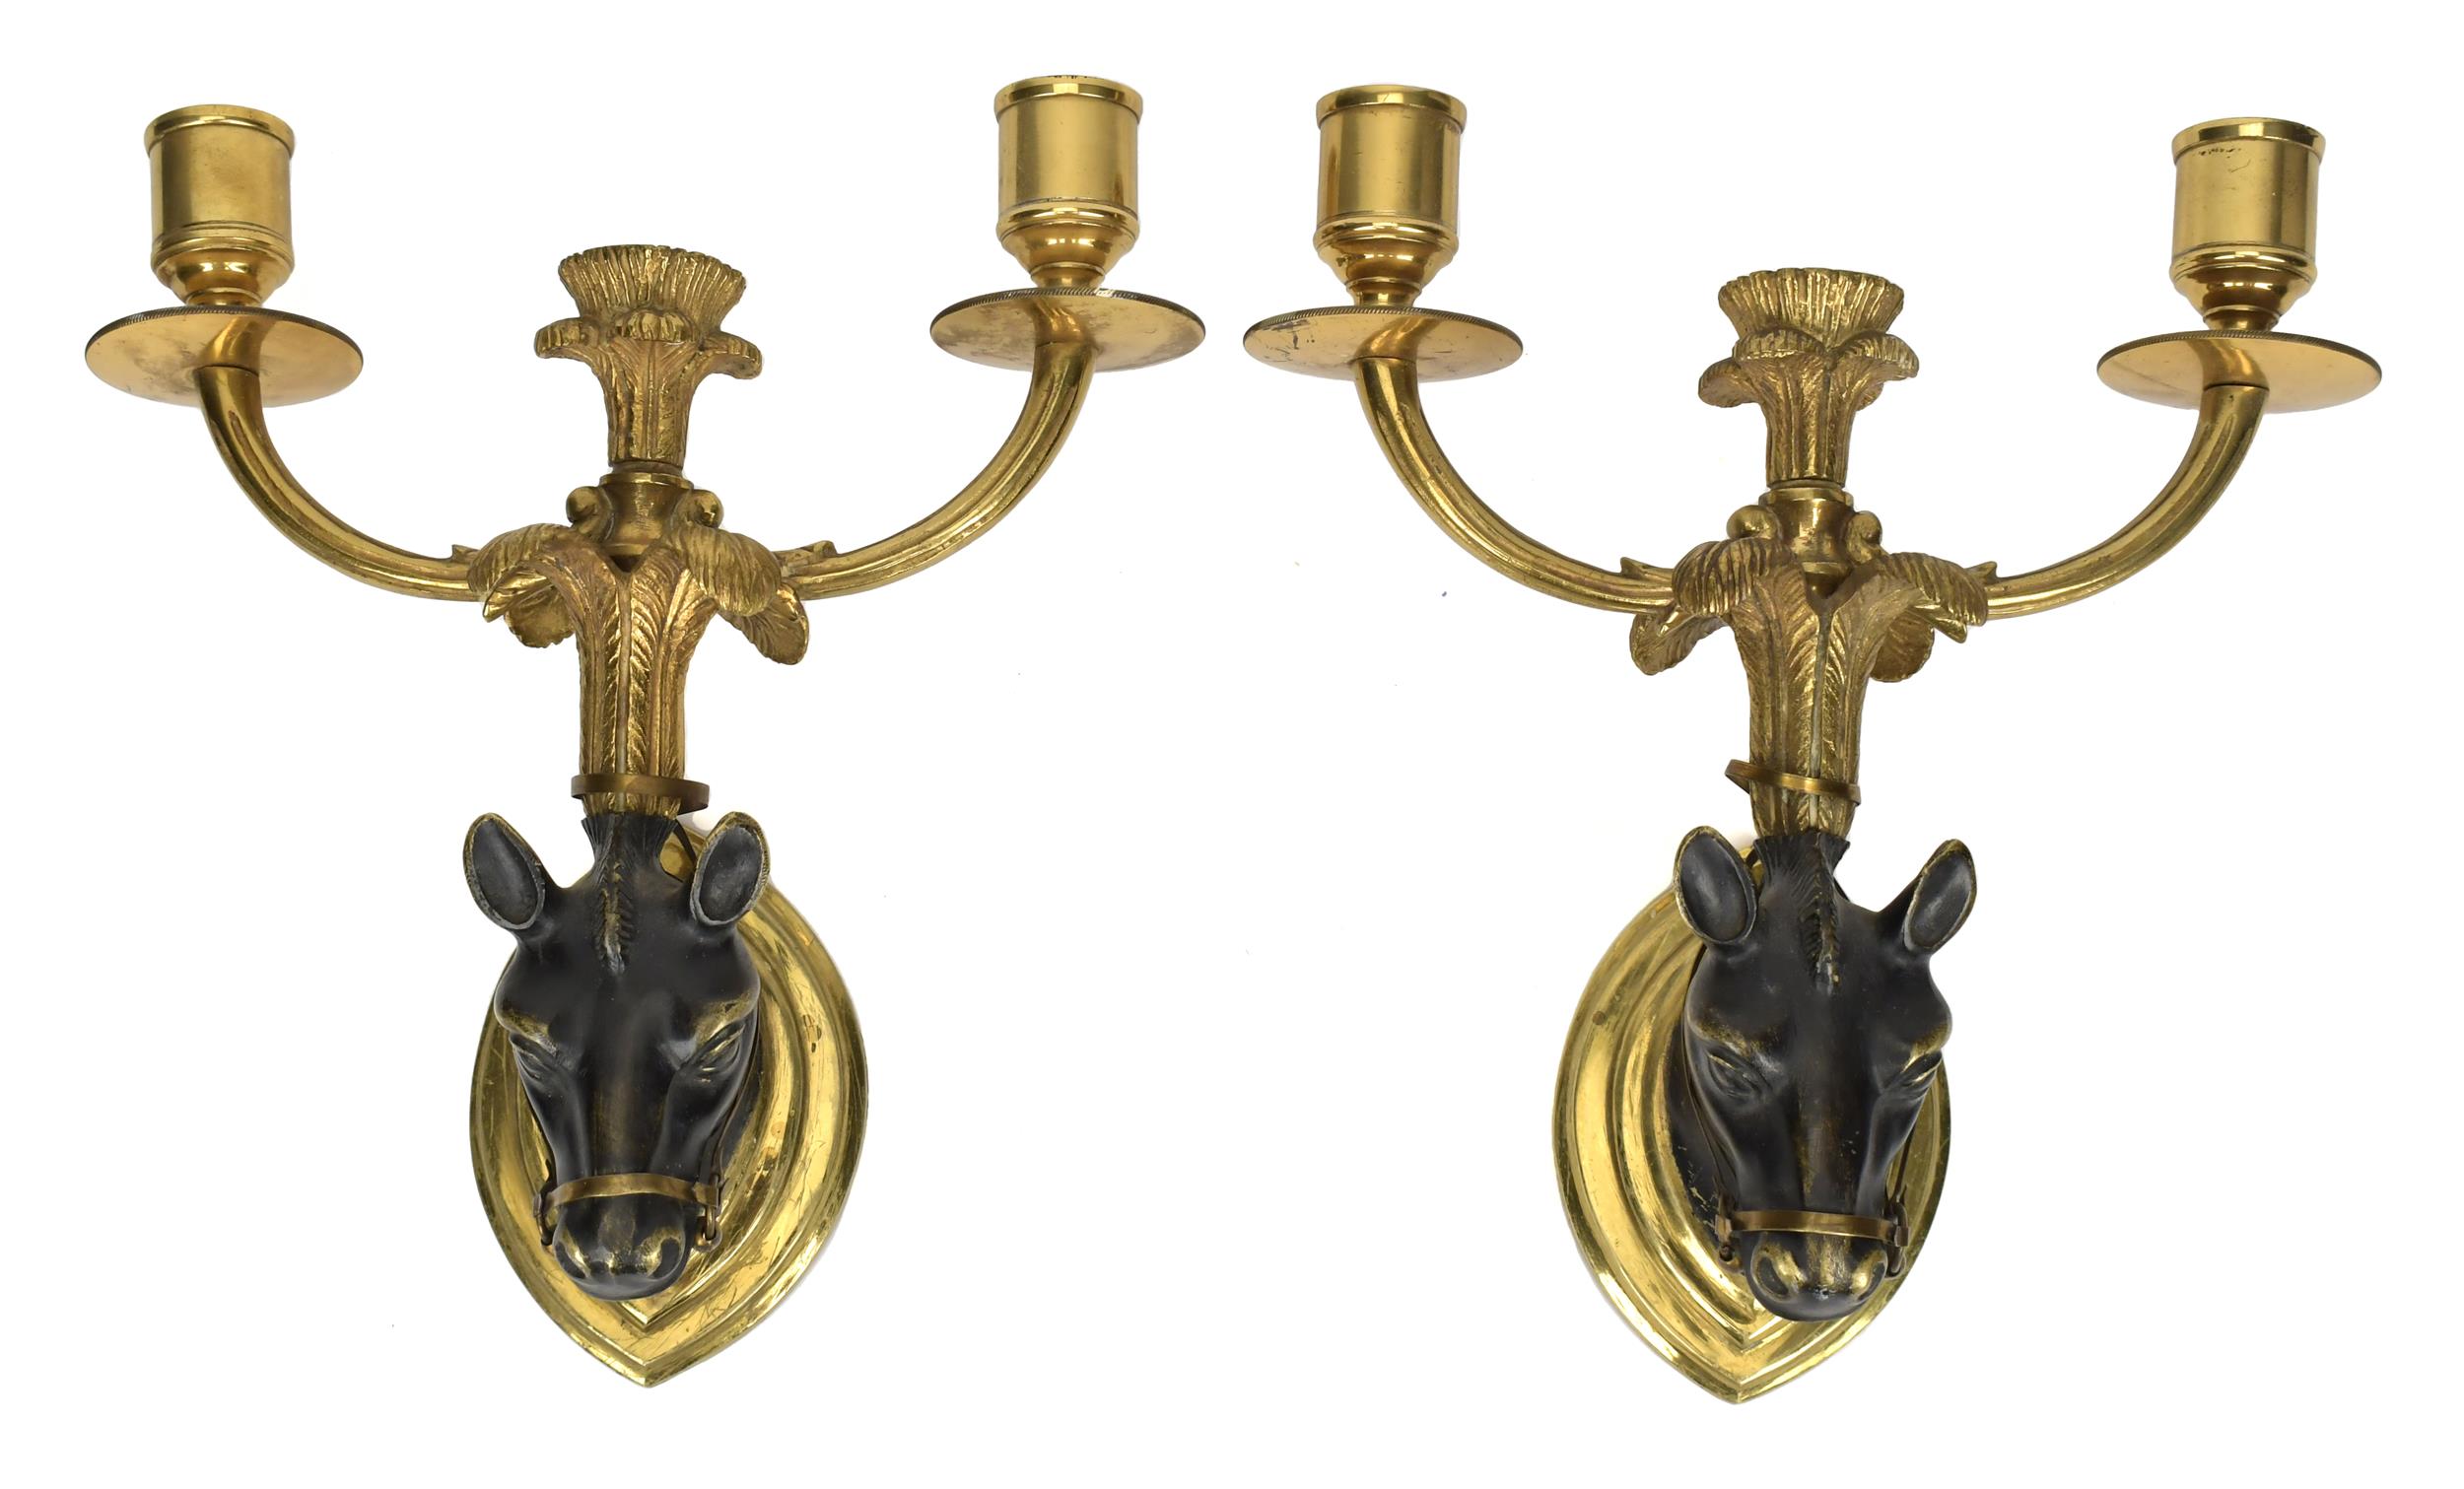 PAIR OF VINTAGE FRENCH BRONZE HORSE